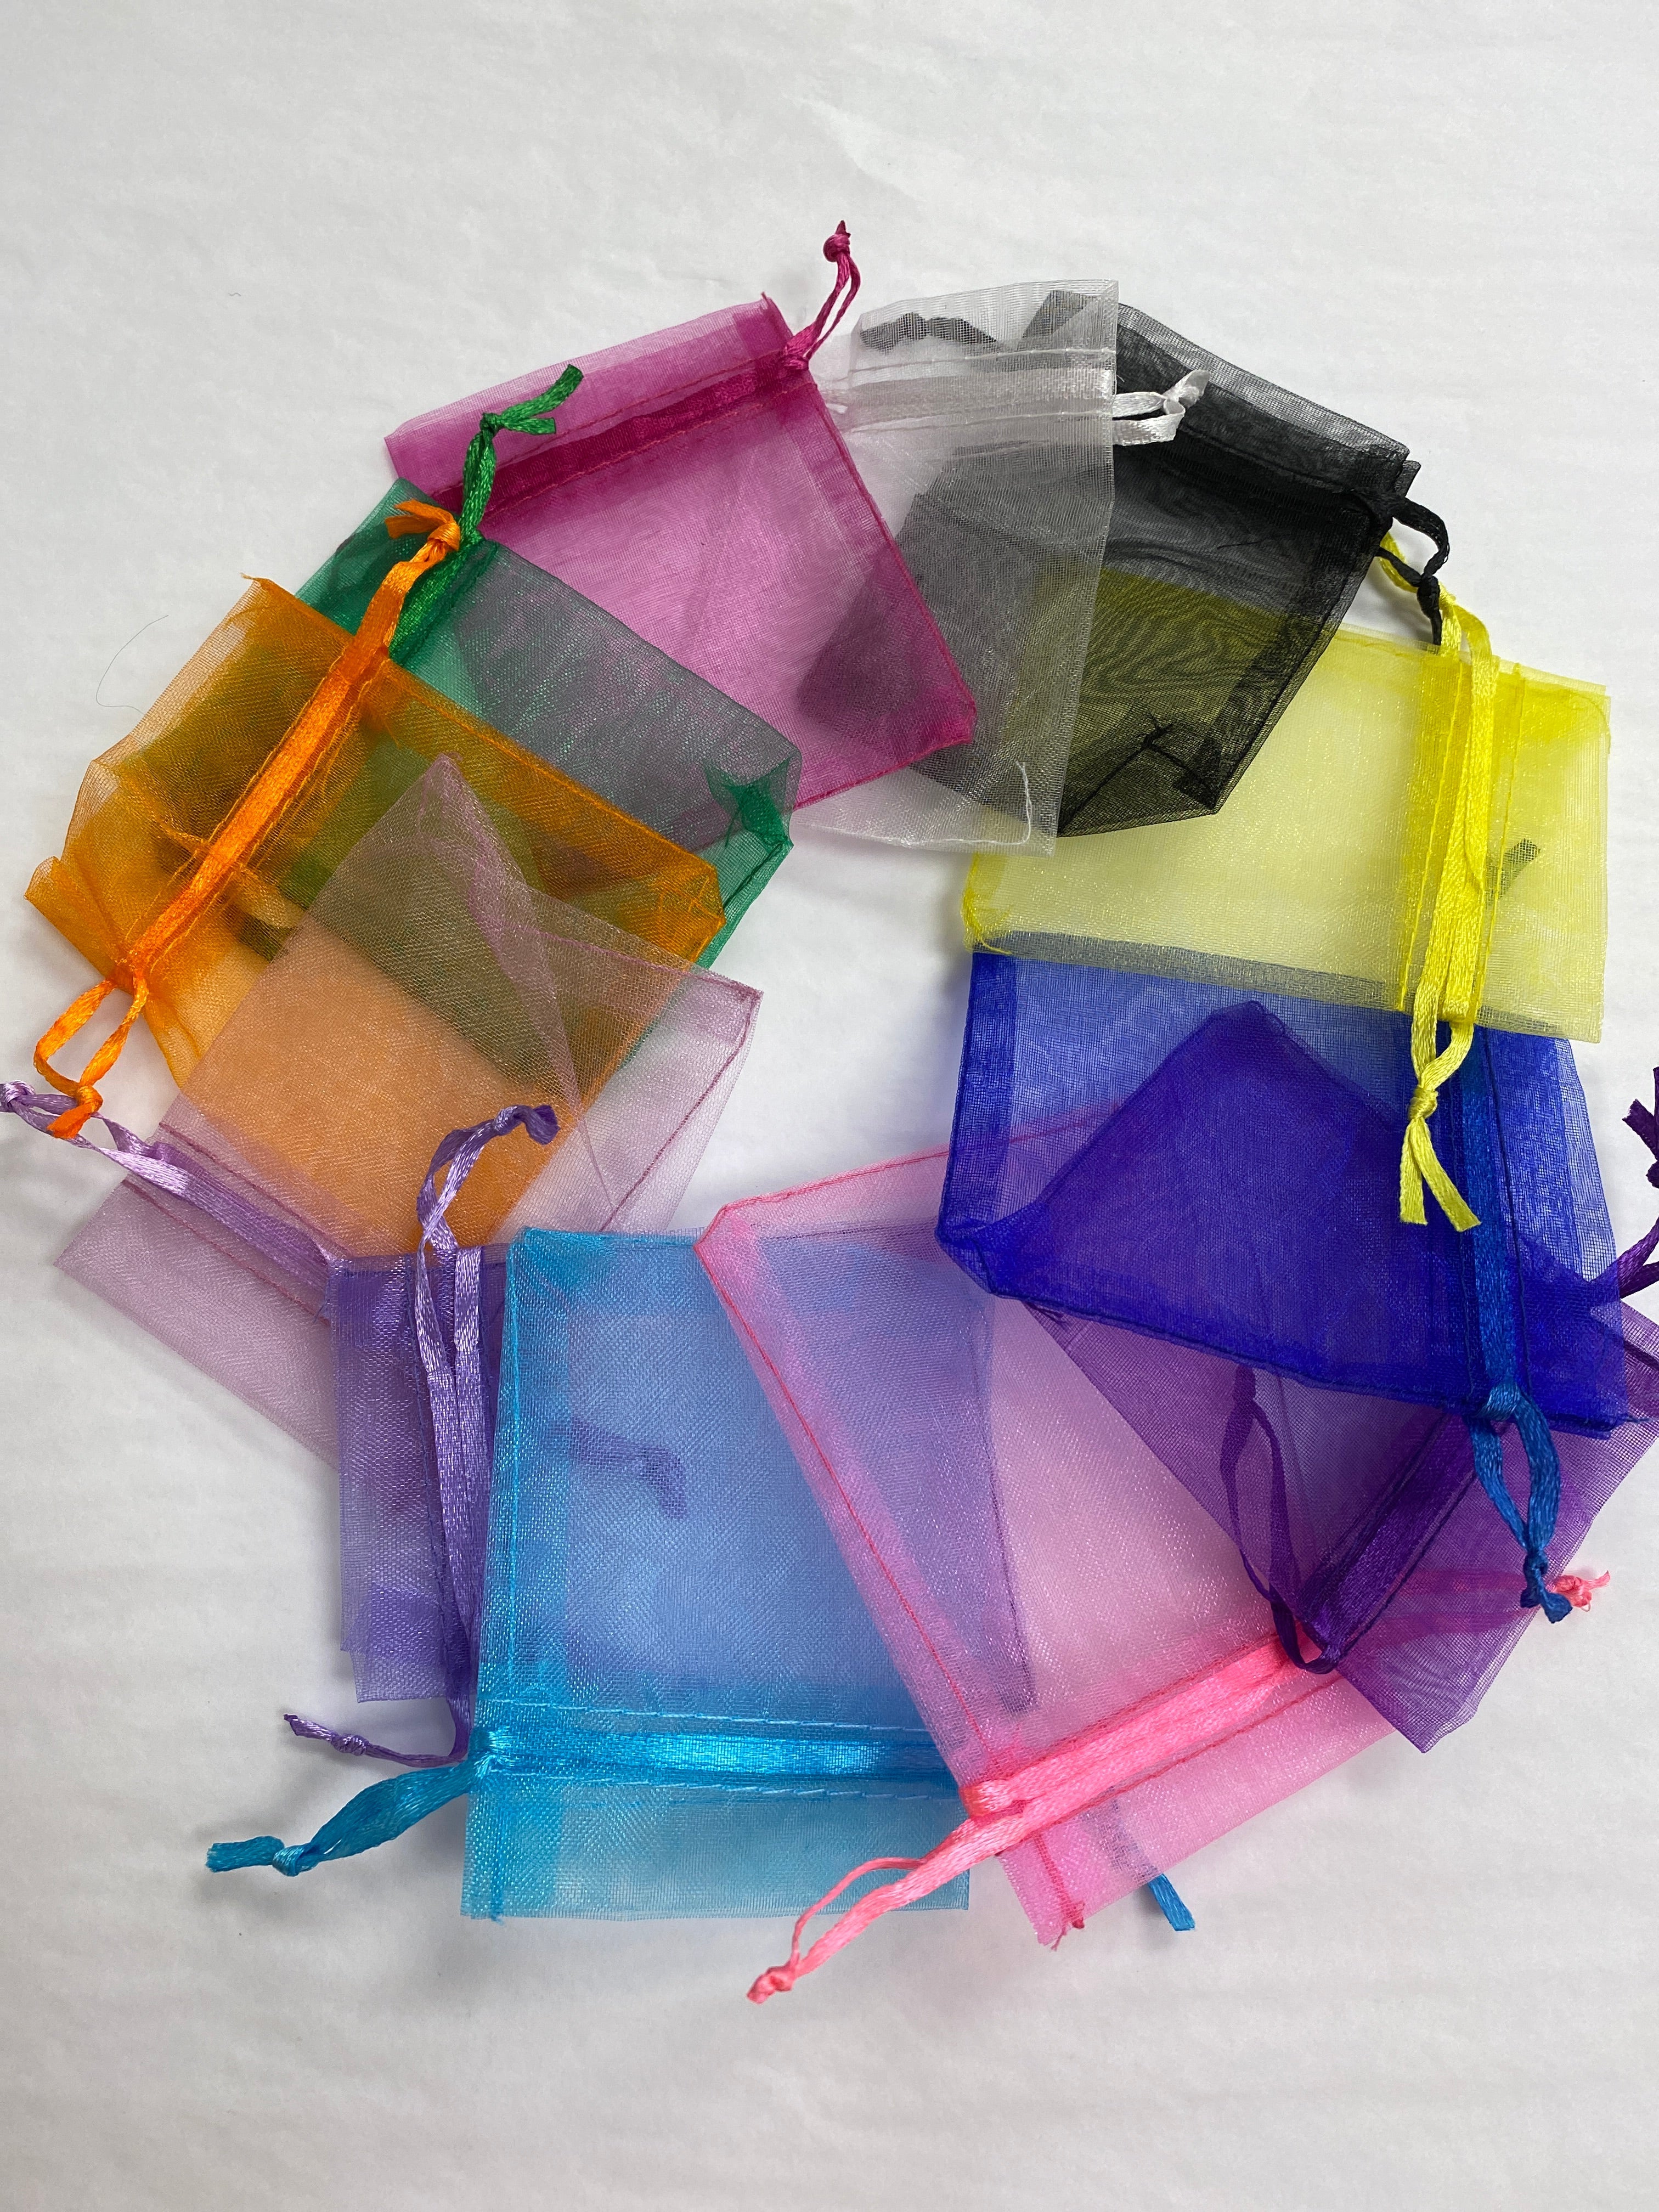 Gift bags of many colors from leather to organza